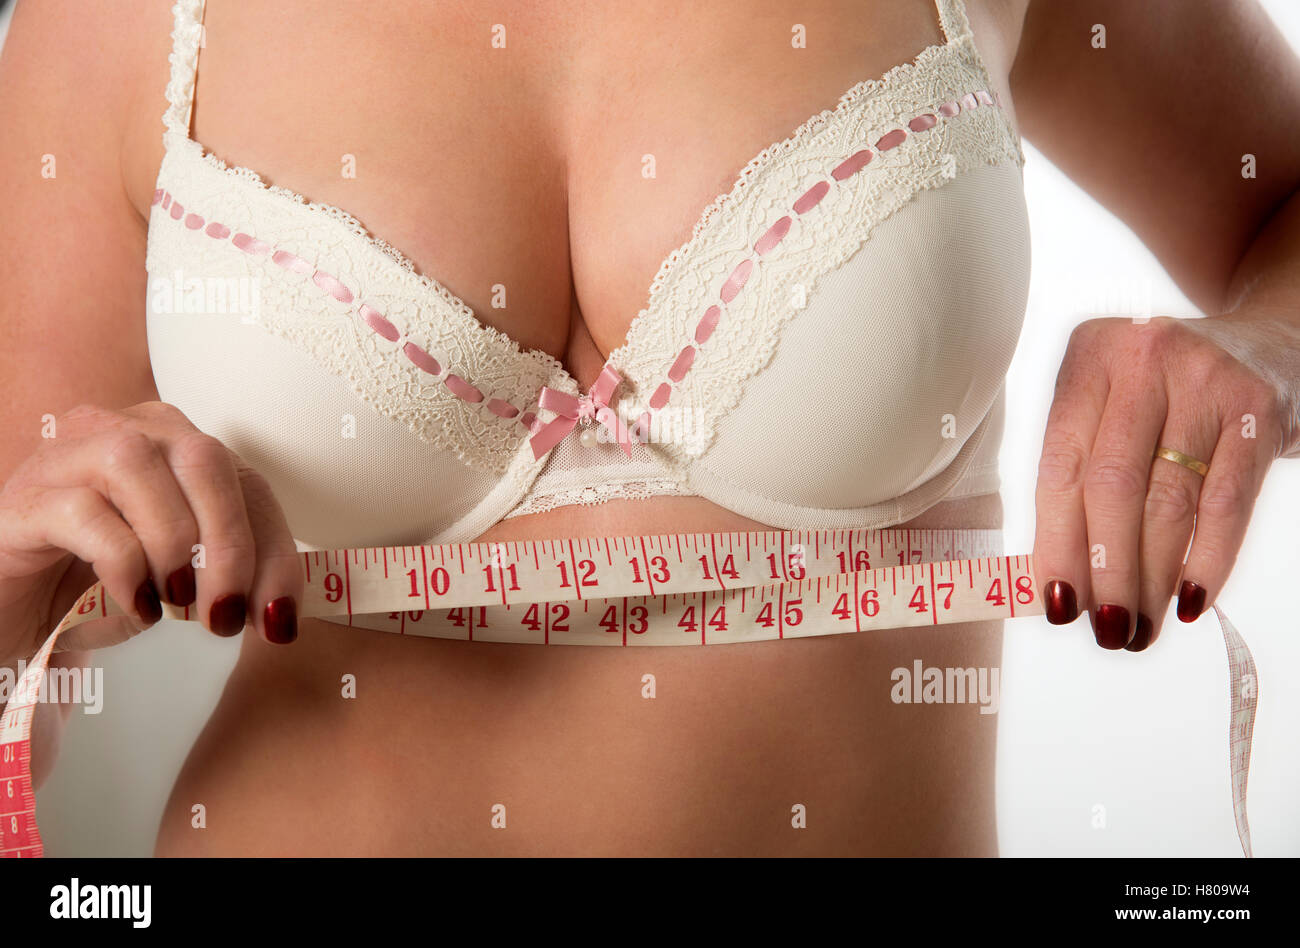 139 Bra Sizes Stock Photos, High-Res Pictures, and Images - Getty